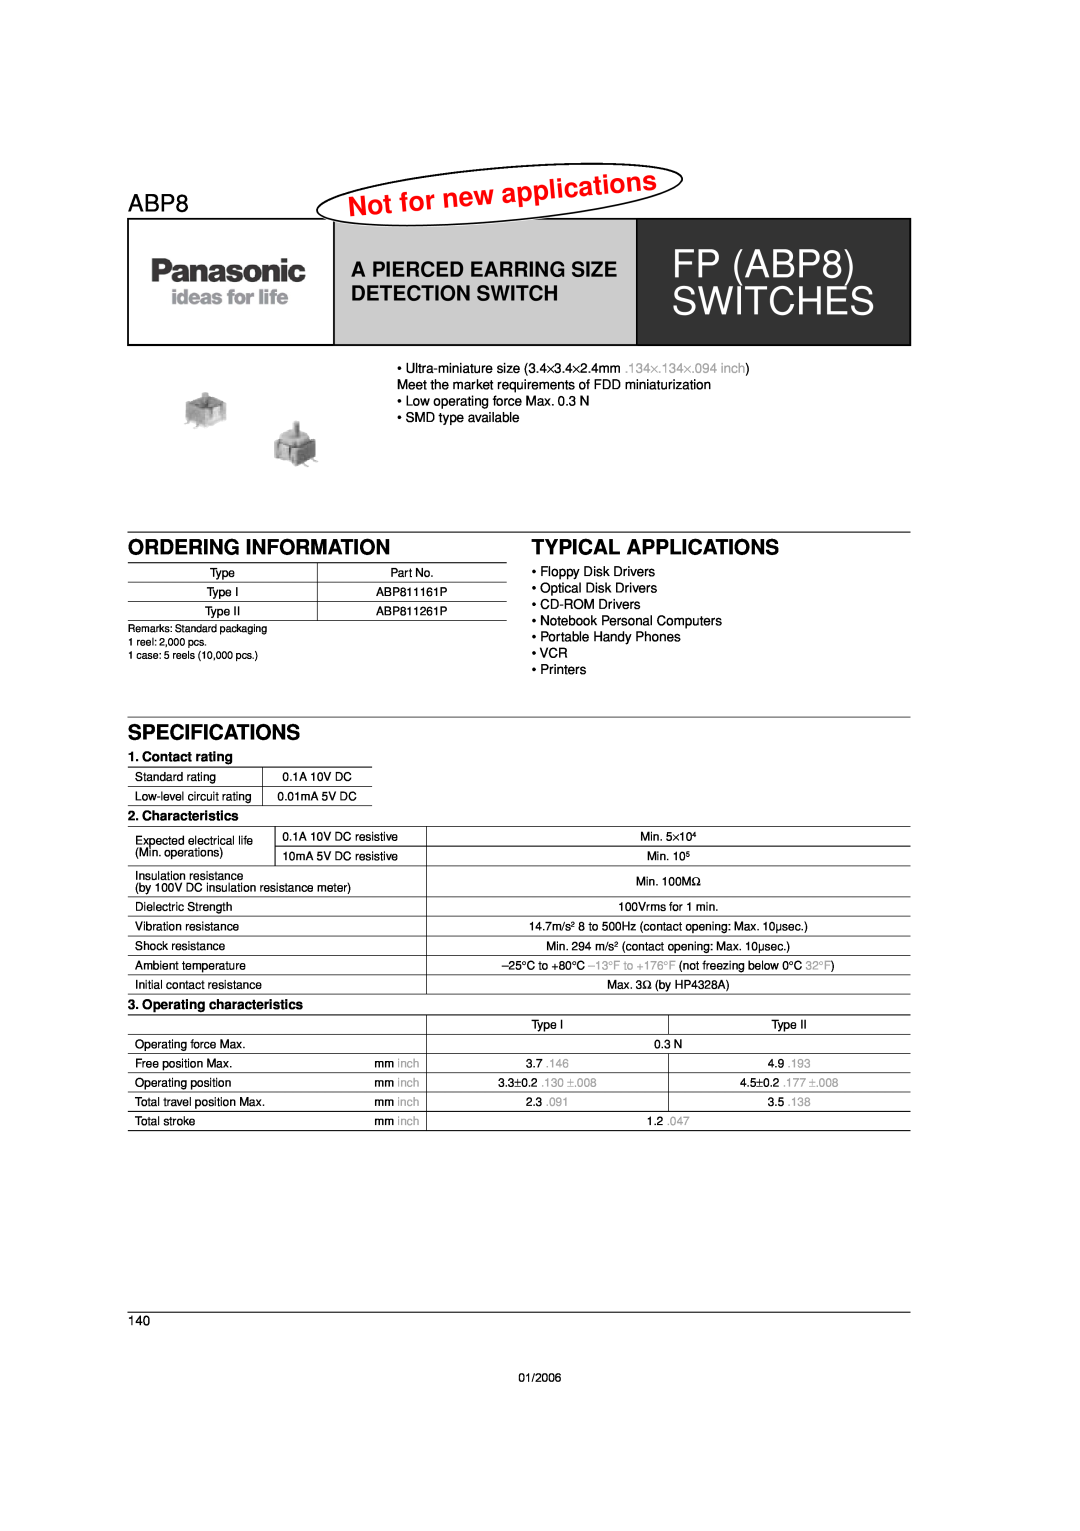 Panasonic FP (ABP8) specifications A Pierced Earring Size Detection Switch, Ordering Information, Typical Applications 